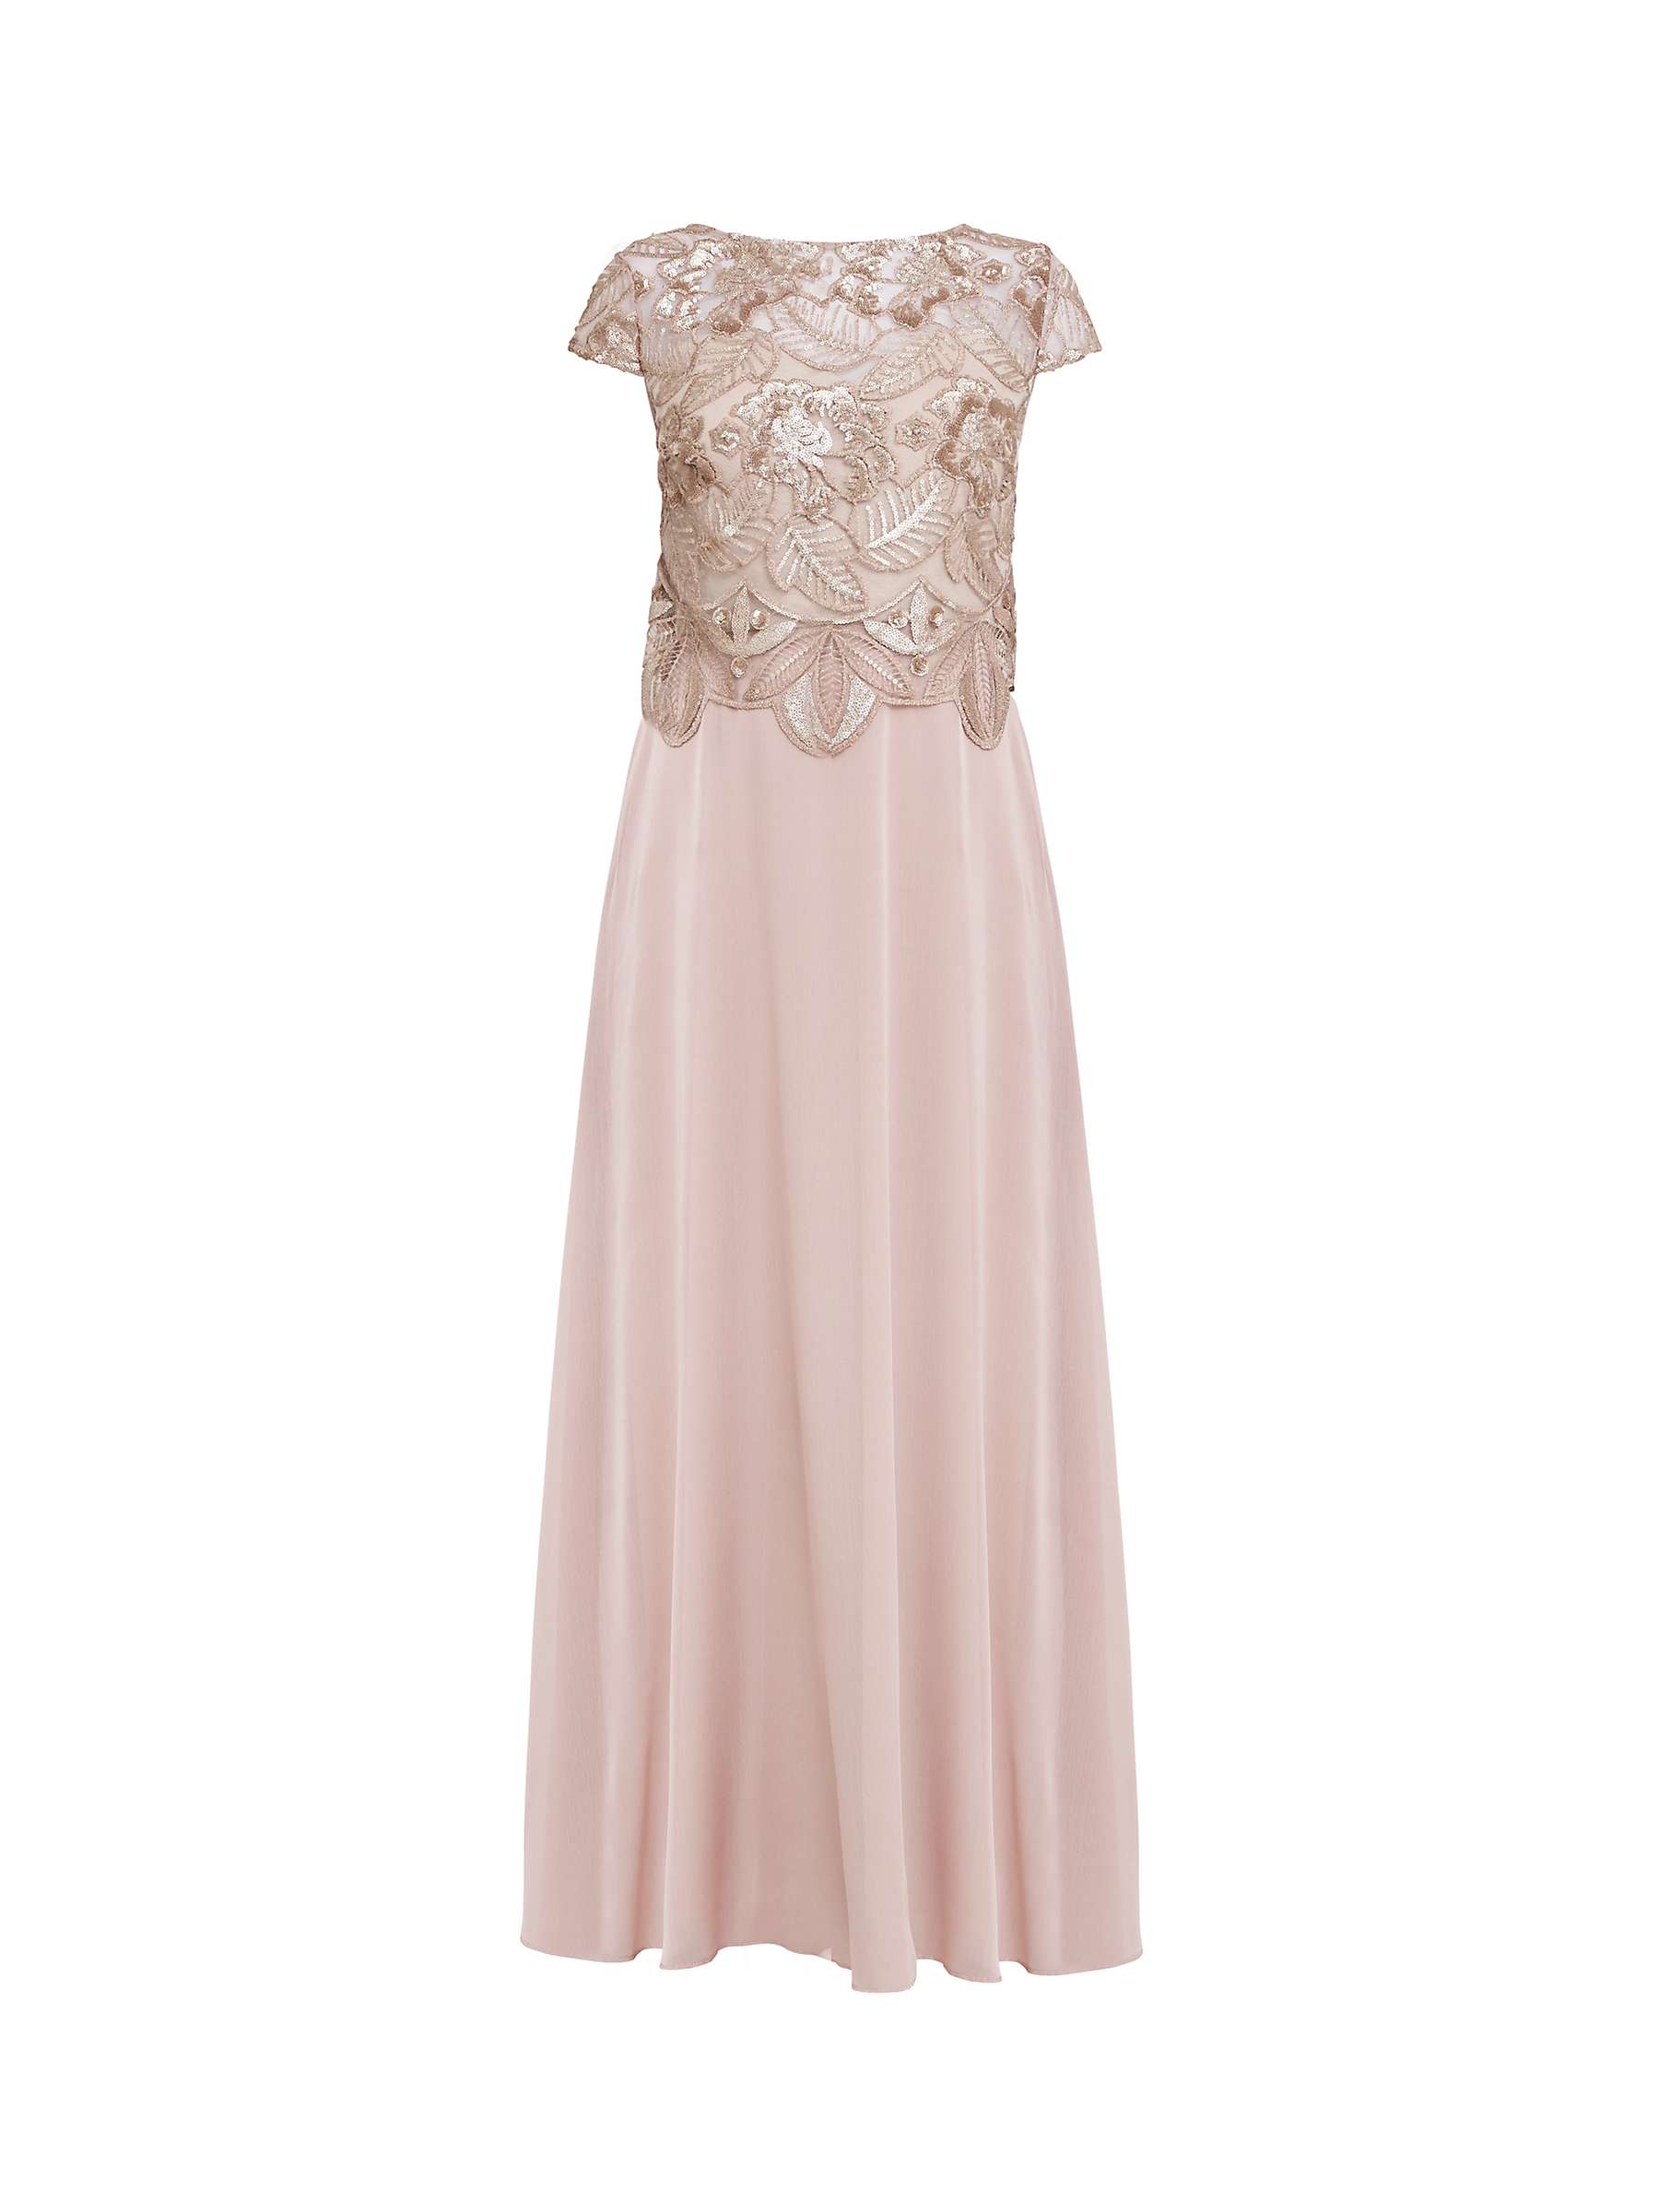 Buy Gina Bacconi Shirley Sequin Bodice Maxi Dress, Rose Gold Online at johnlewis.com